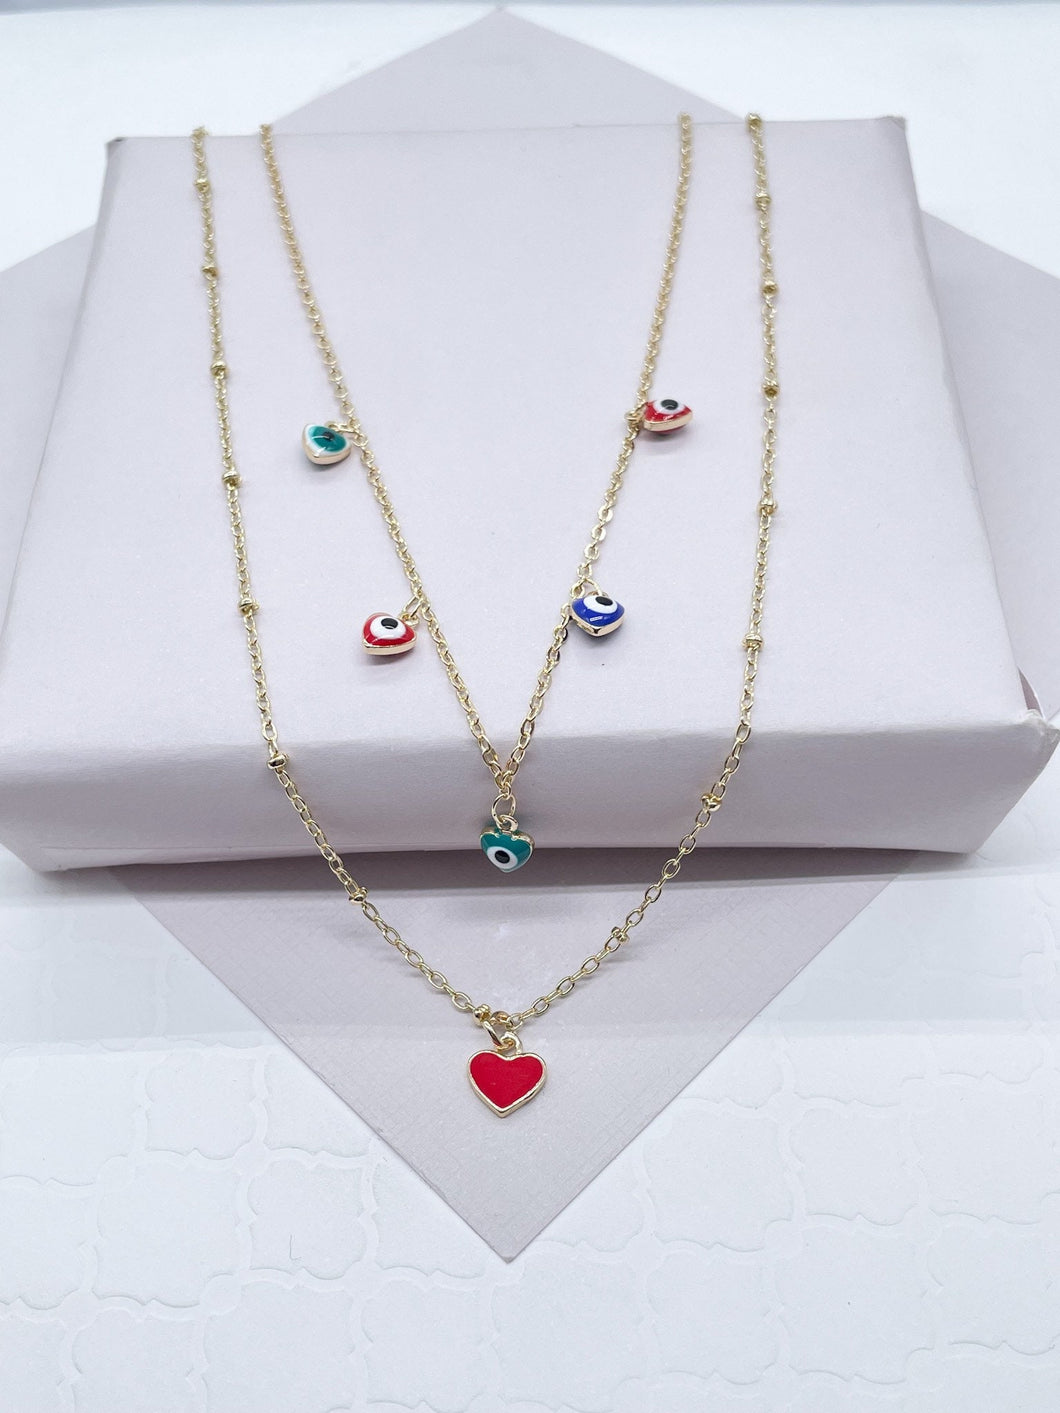 18k Gold Filled Layered Thin Satellite Chain Necklaces with 5 Colorful Evil Eyes